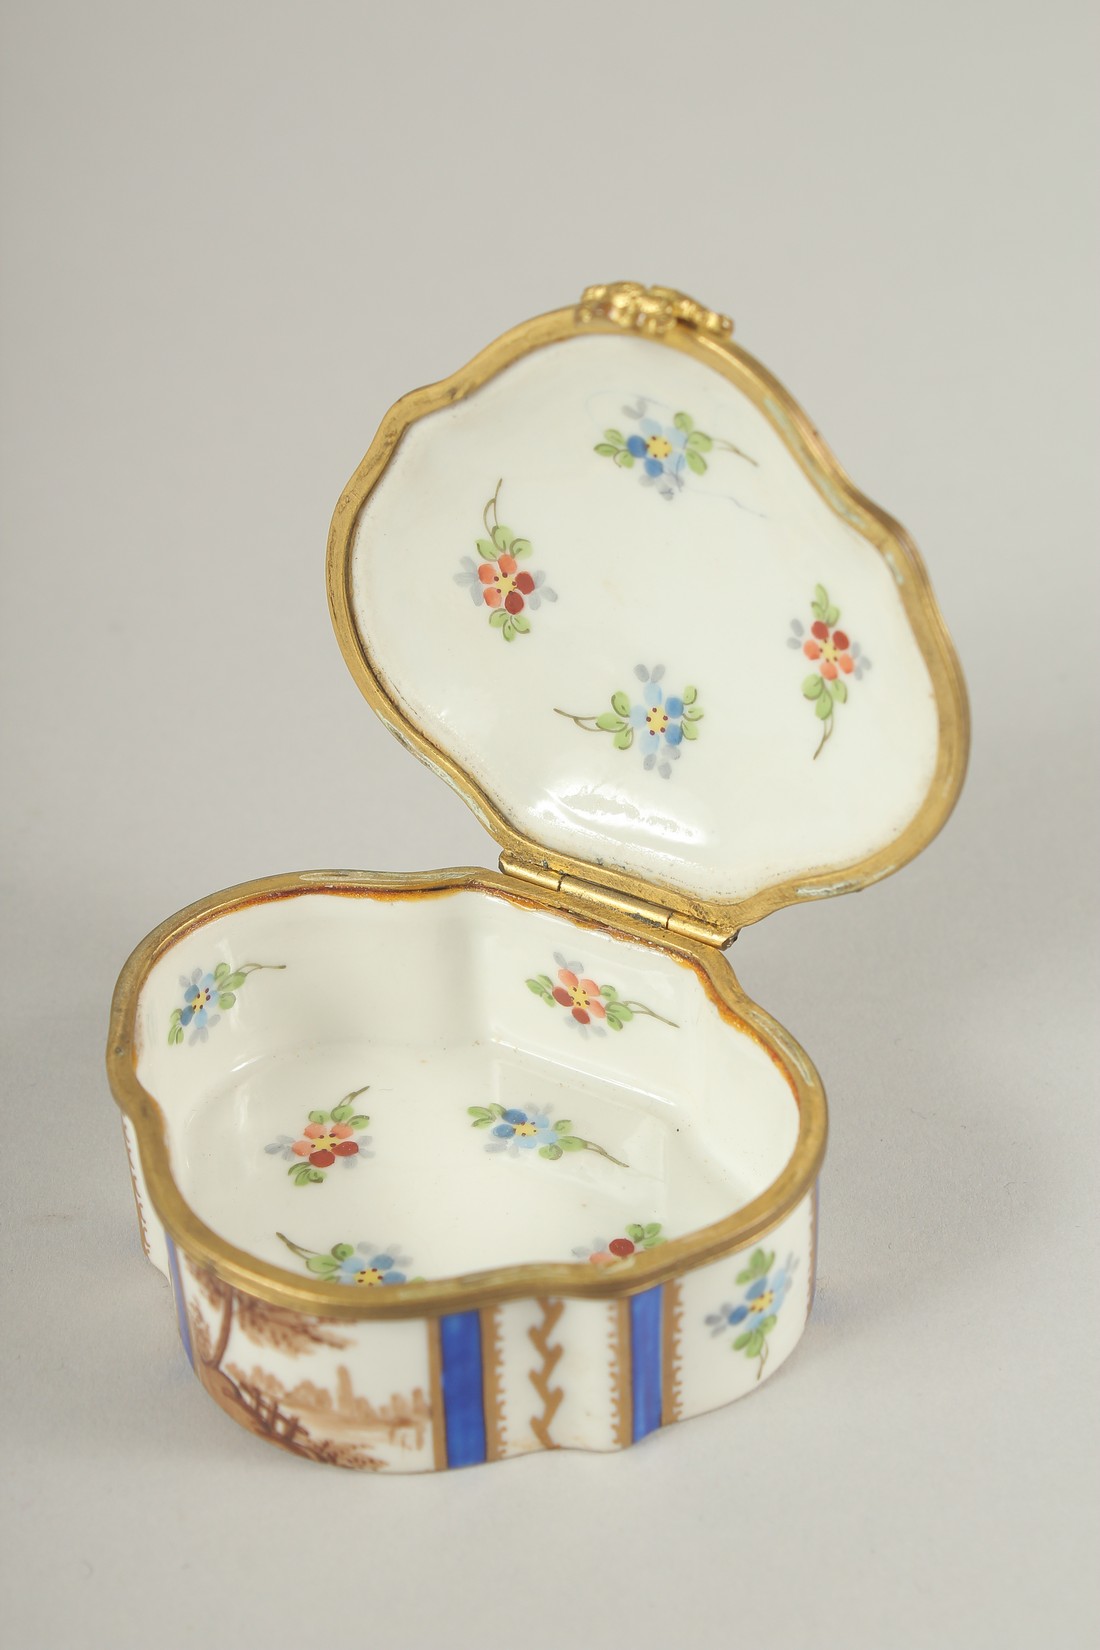 A SMALL SEVRES PORCELAIN PILL BOX AND COVER with blue and white decoration and roses. 3ins wide. - Image 2 of 3